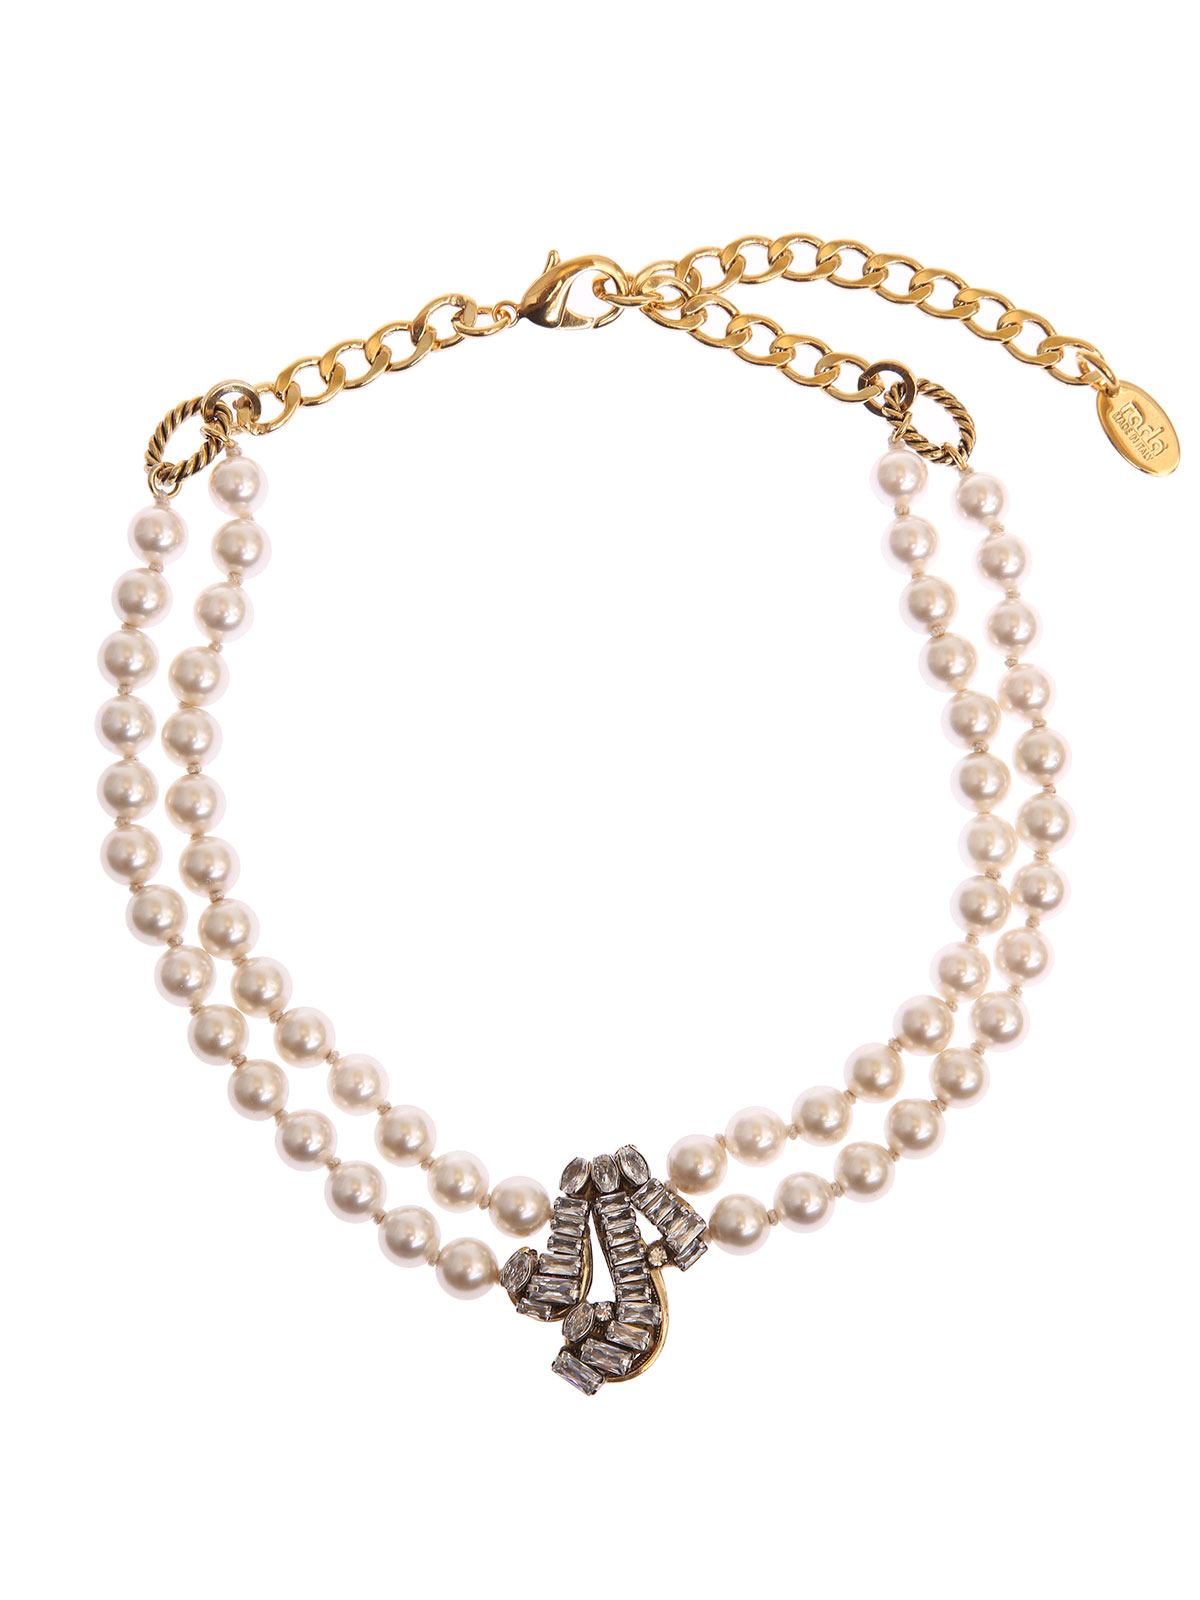 Pearl necklace with jewel curly decoration